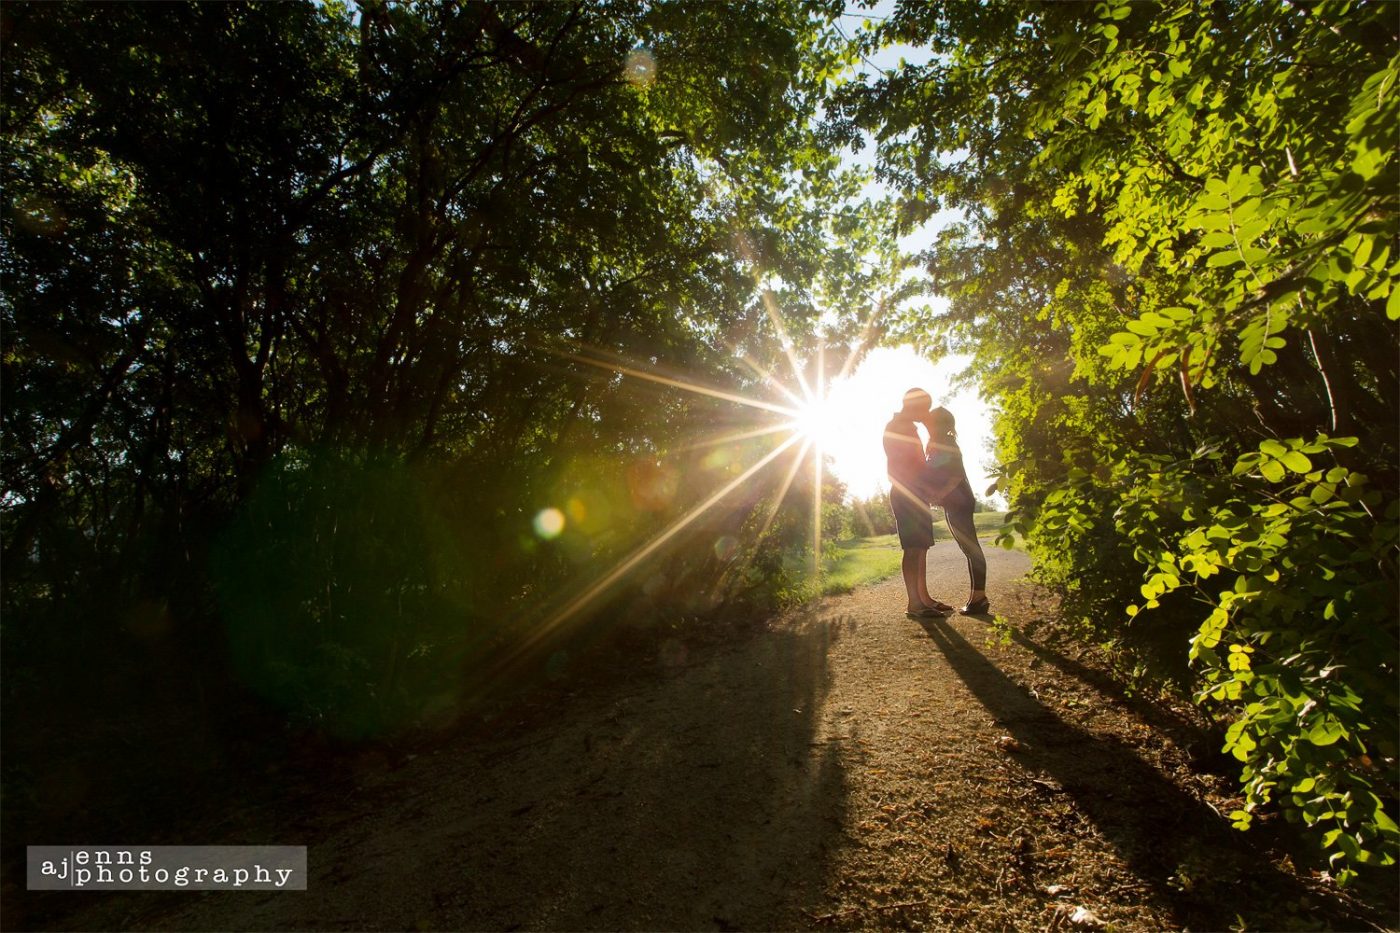 A special kiss during sunset under a canopy of trees